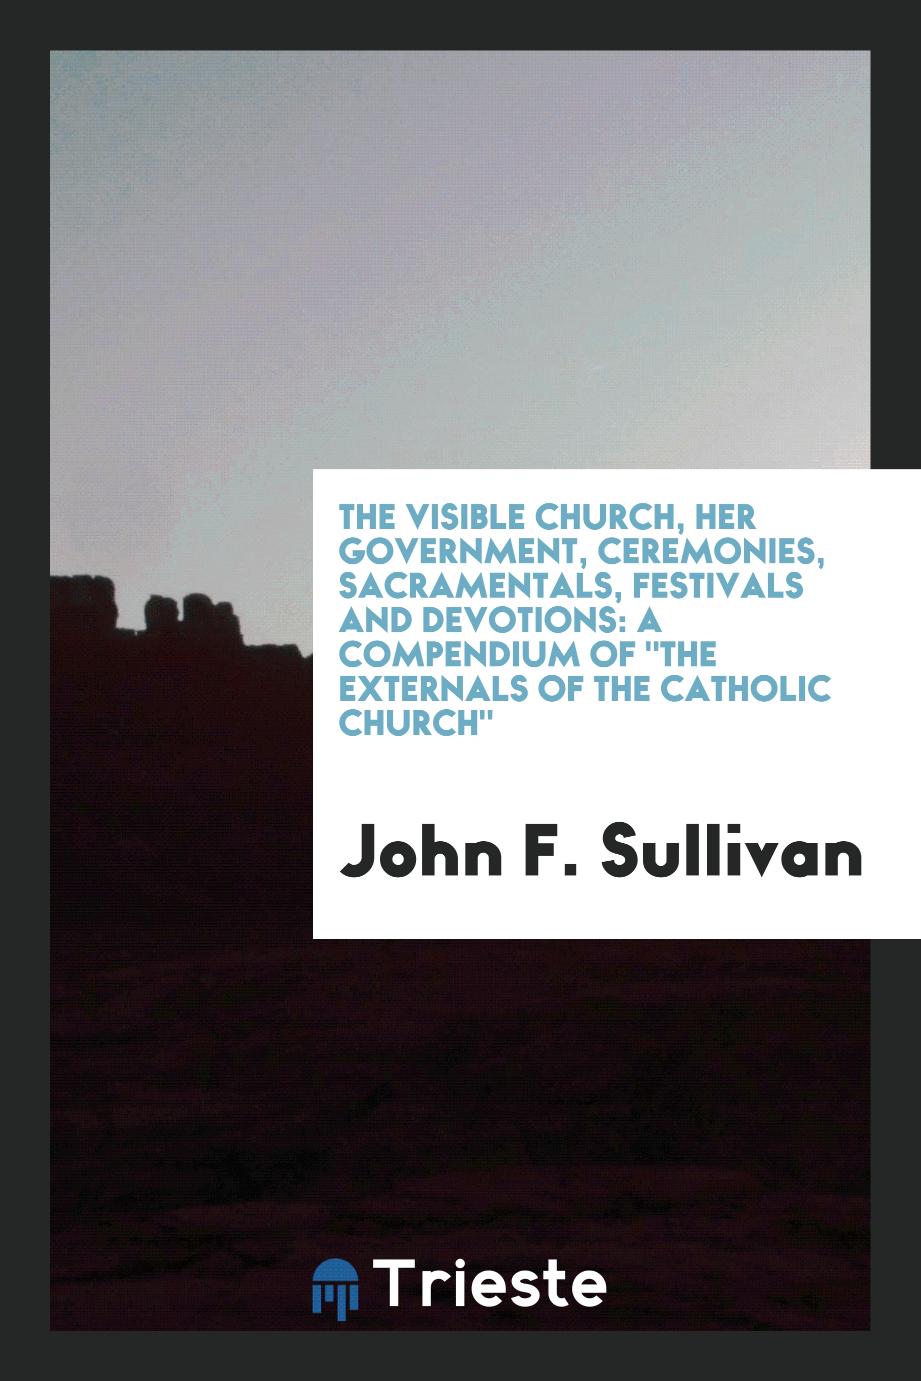 The visible church, her government, ceremonies, sacramentals, festivals and devotions: a compendium of "The externals of the Catholic church"